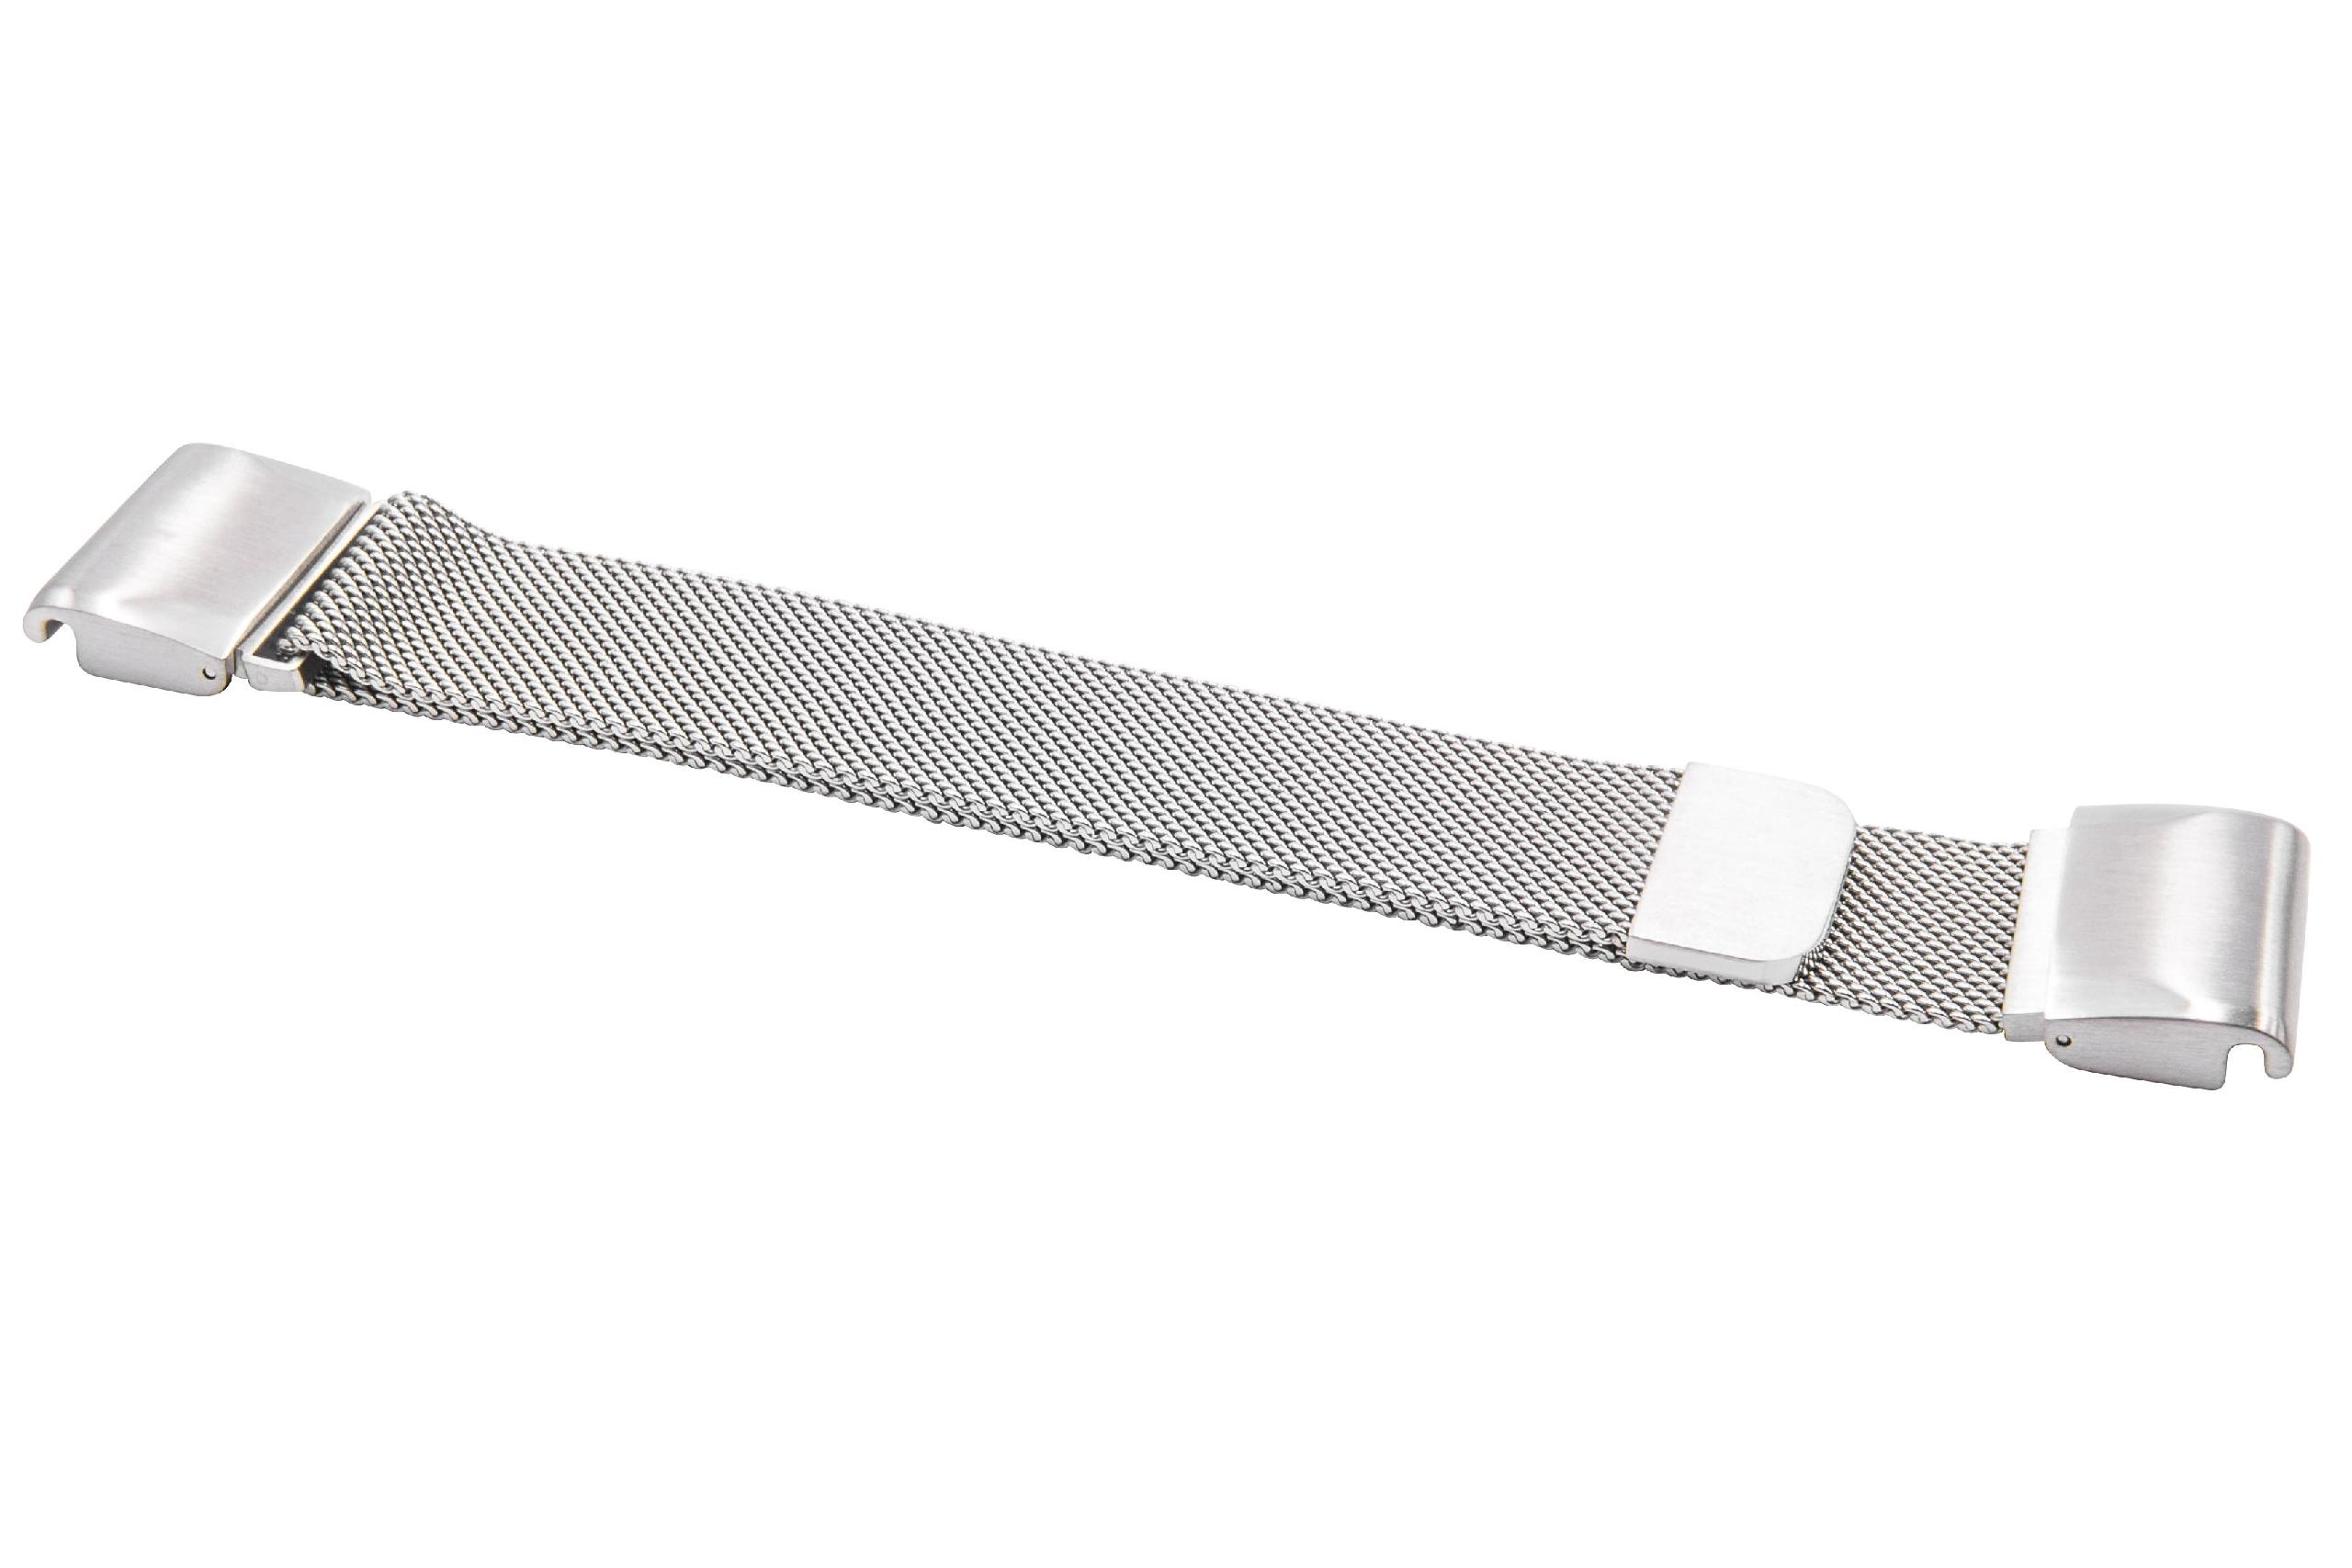 wristband for Garmin Quatix Smartwatch etc. - Up to 248 mm wrist circumference, stainless steel, silver